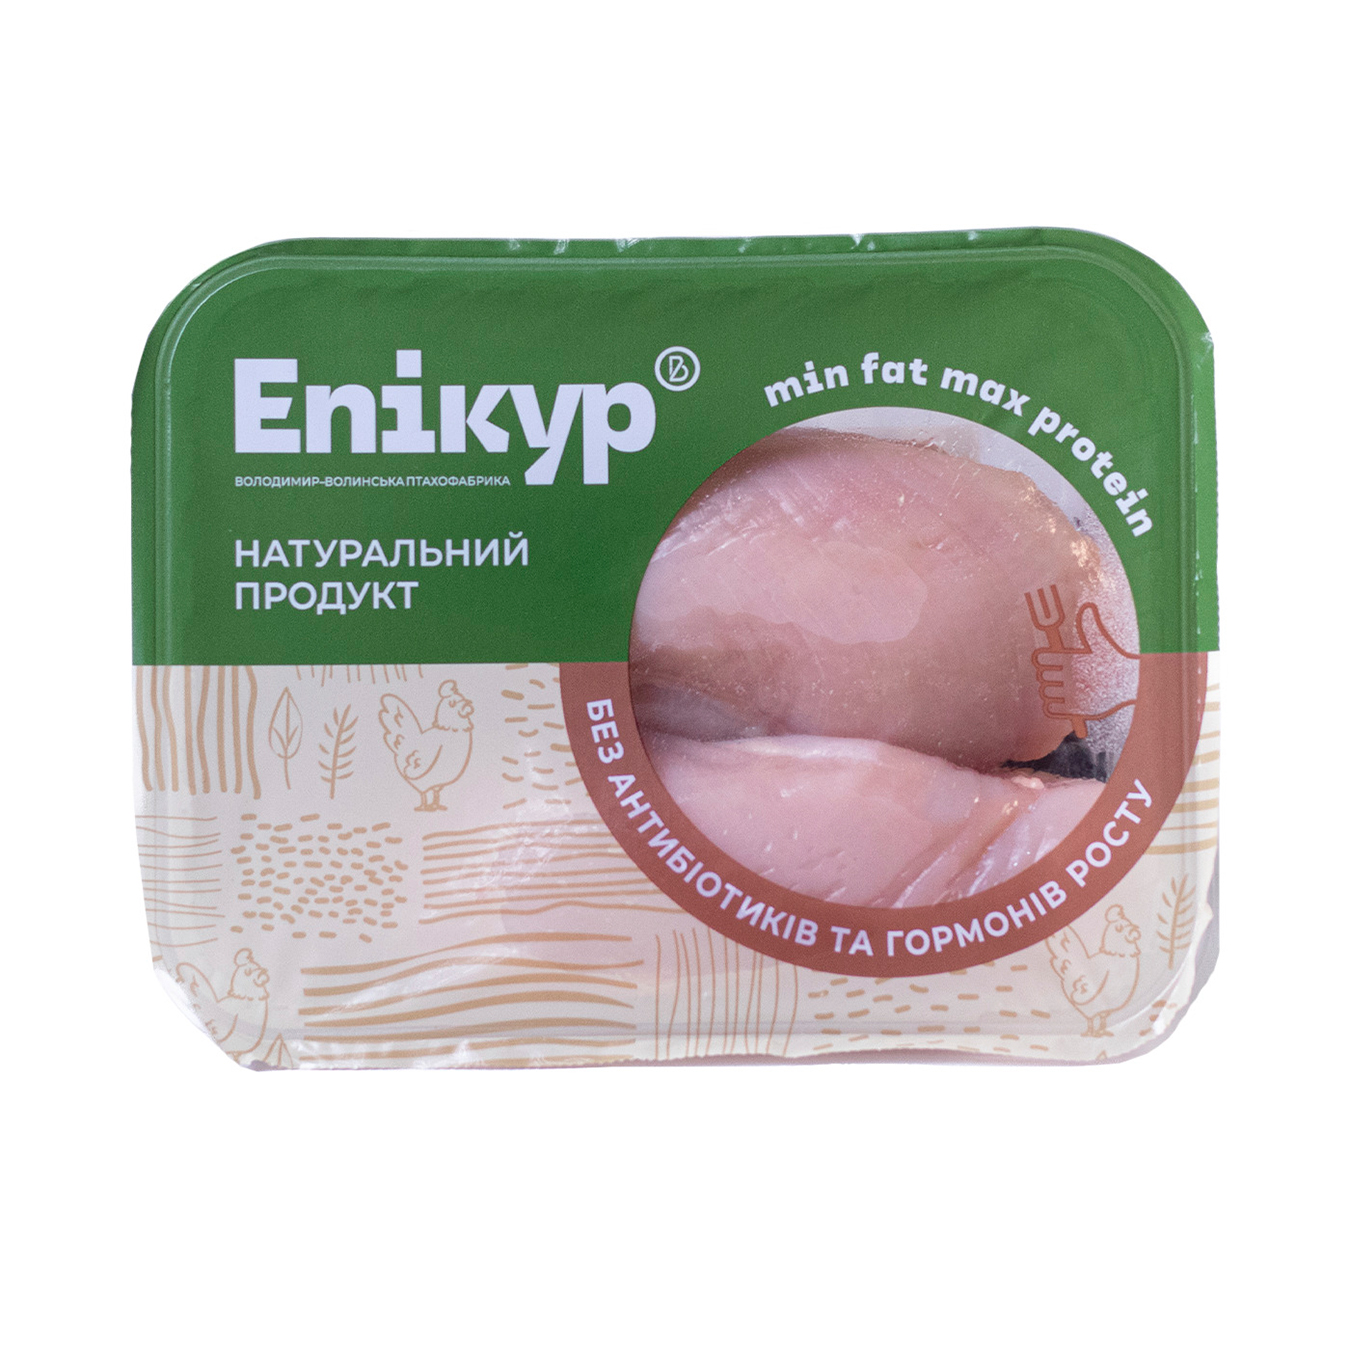 Epicure fillet of broiler chicken chilled 700-800 grams in a package